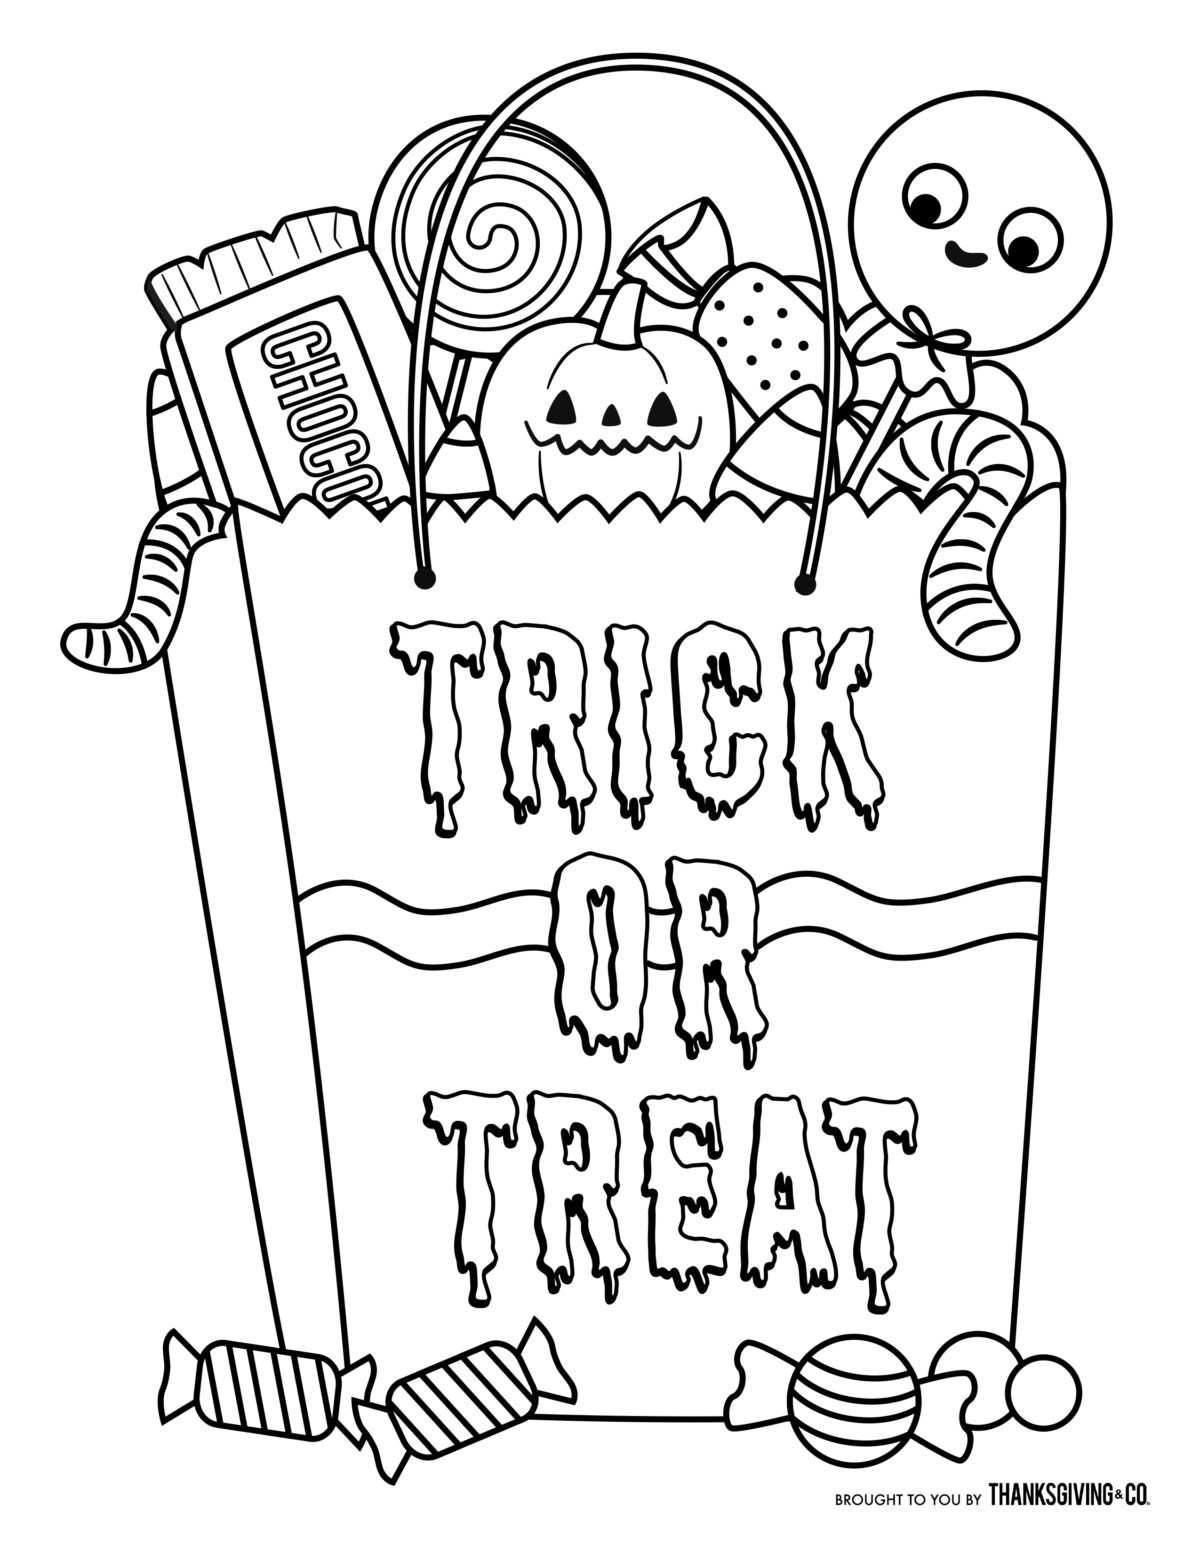 Halloween Coloring Page Coloring Page Fabulous Halloween Coloring Pages ...